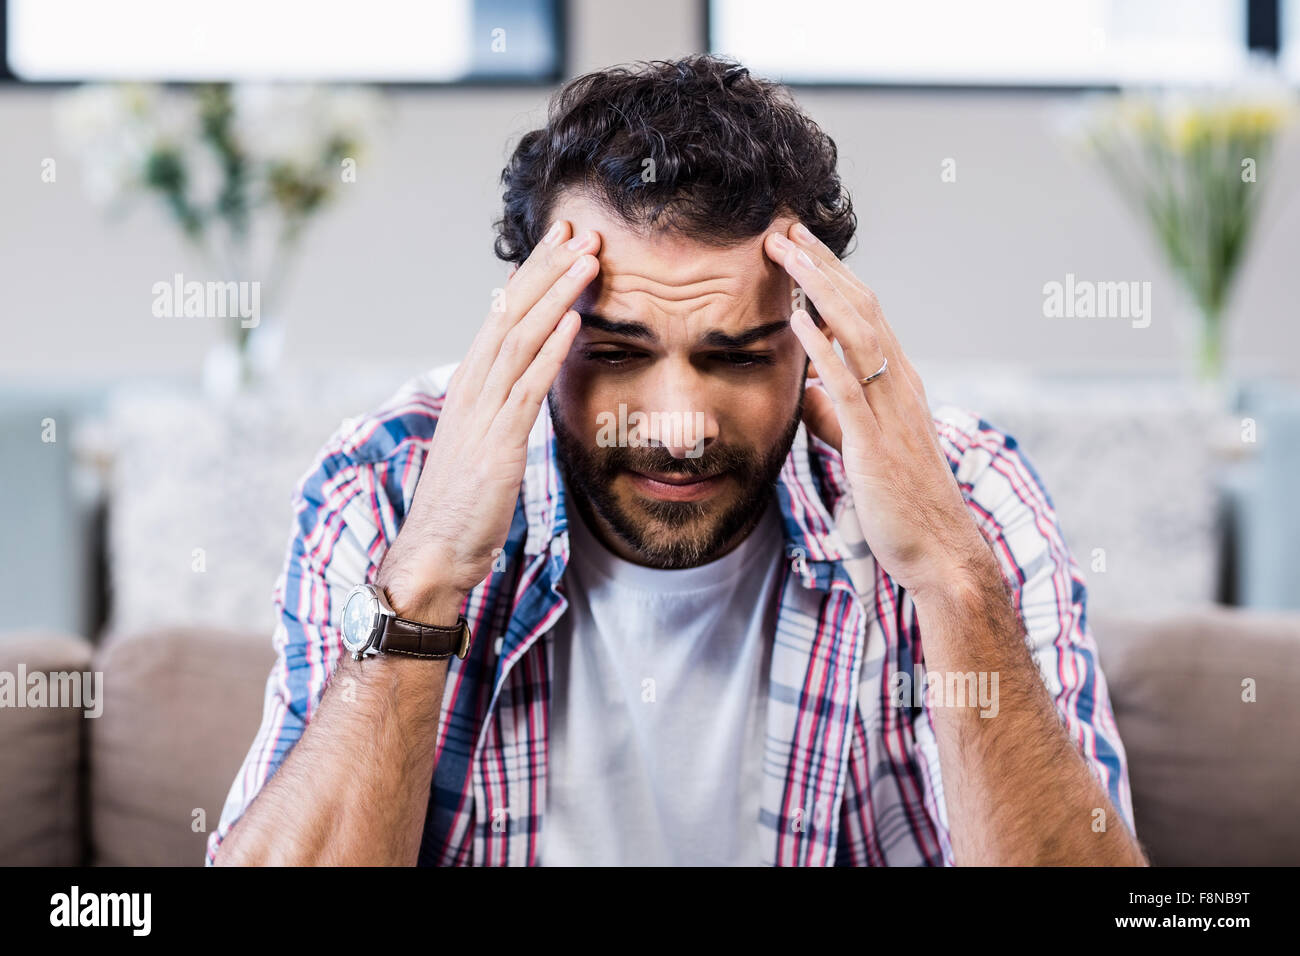 Worried man with hands on his face Stock Photo